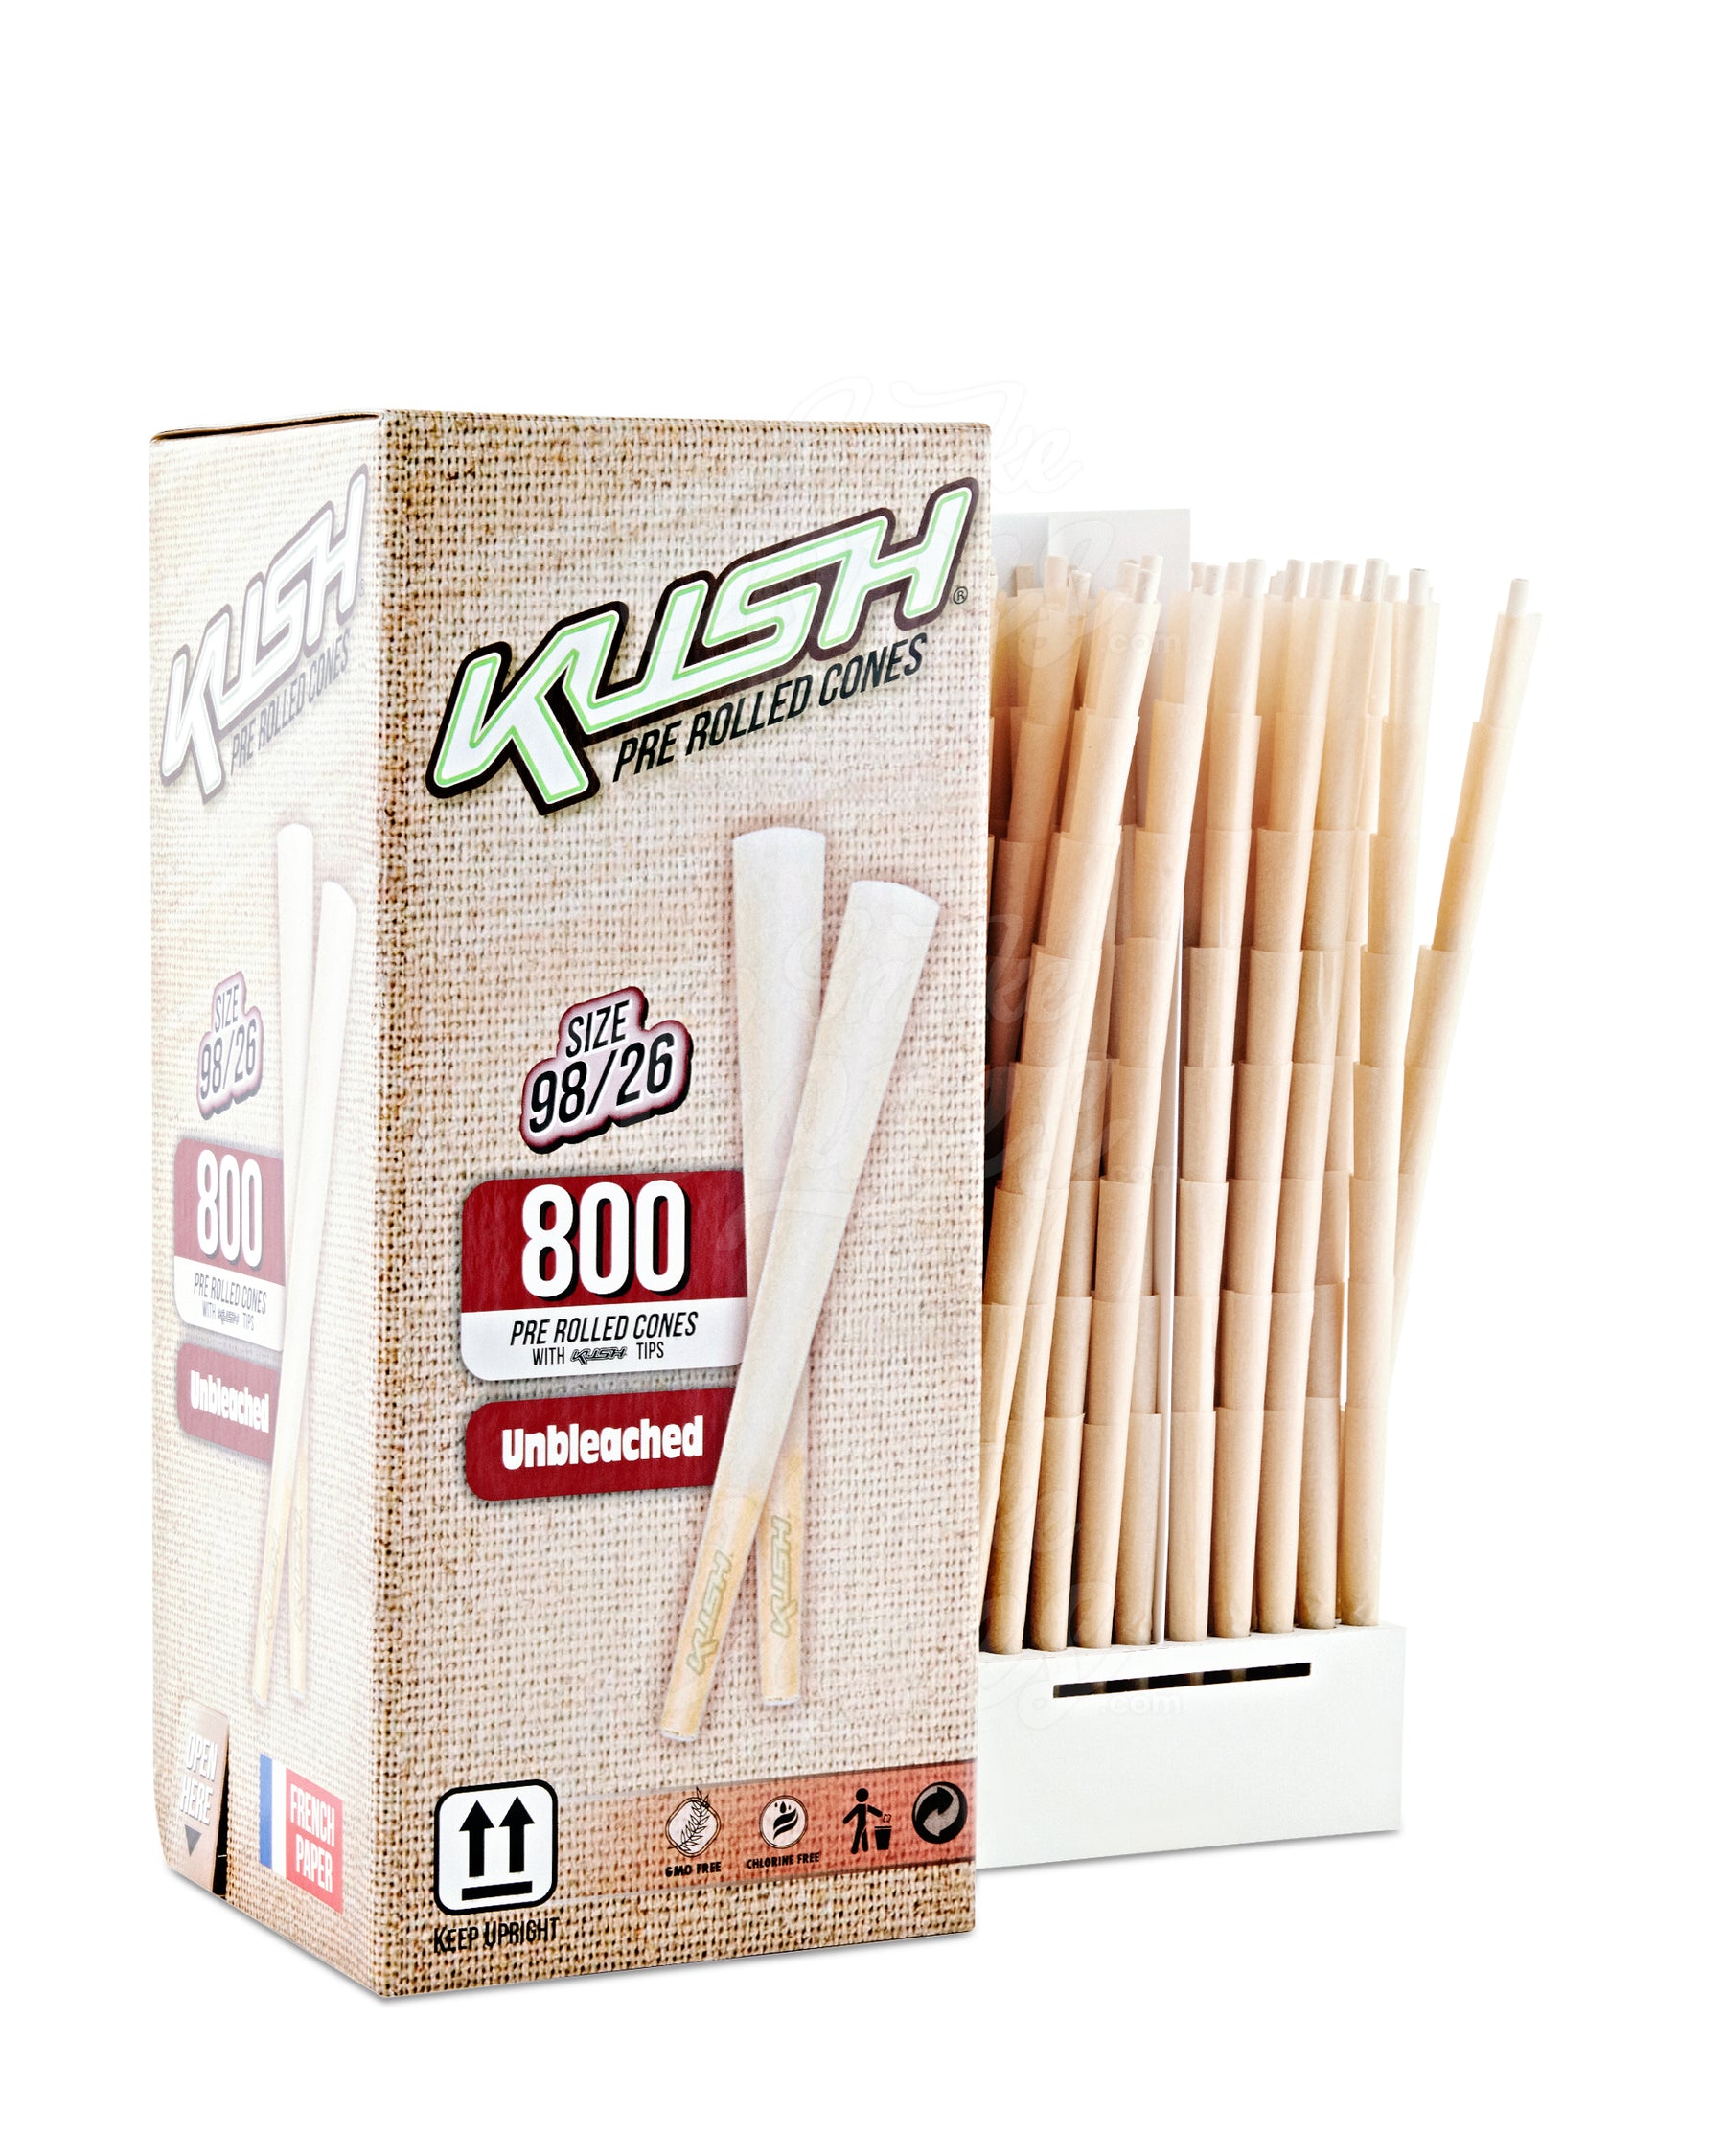 Kush 98mm 98 Special Size Unbleached Pre Rolled Cones w/ Filter Tip 800/Box - 2